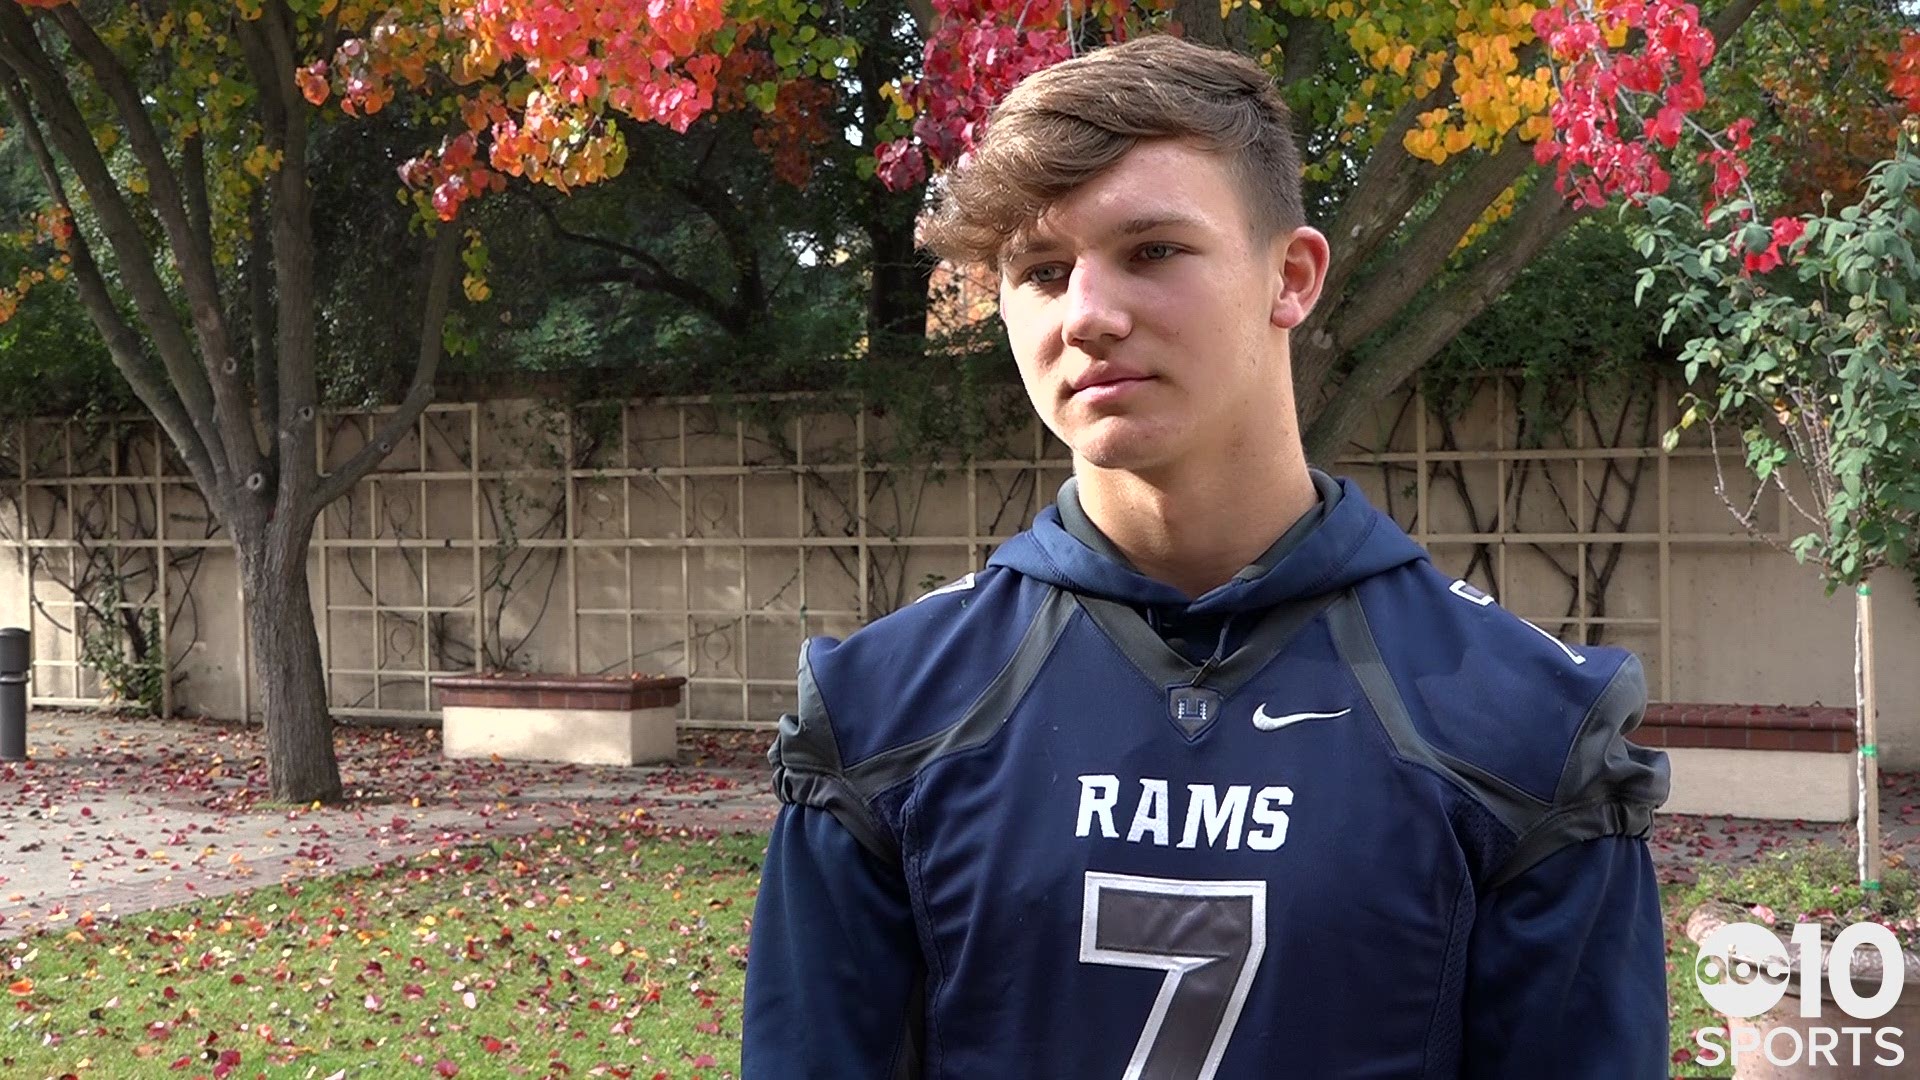 Casa Roble senior football player Ruben Voznyuk describes his emotional visit with the Paradise High School football team ahead of his Sac-Joaquin Section Championship game.